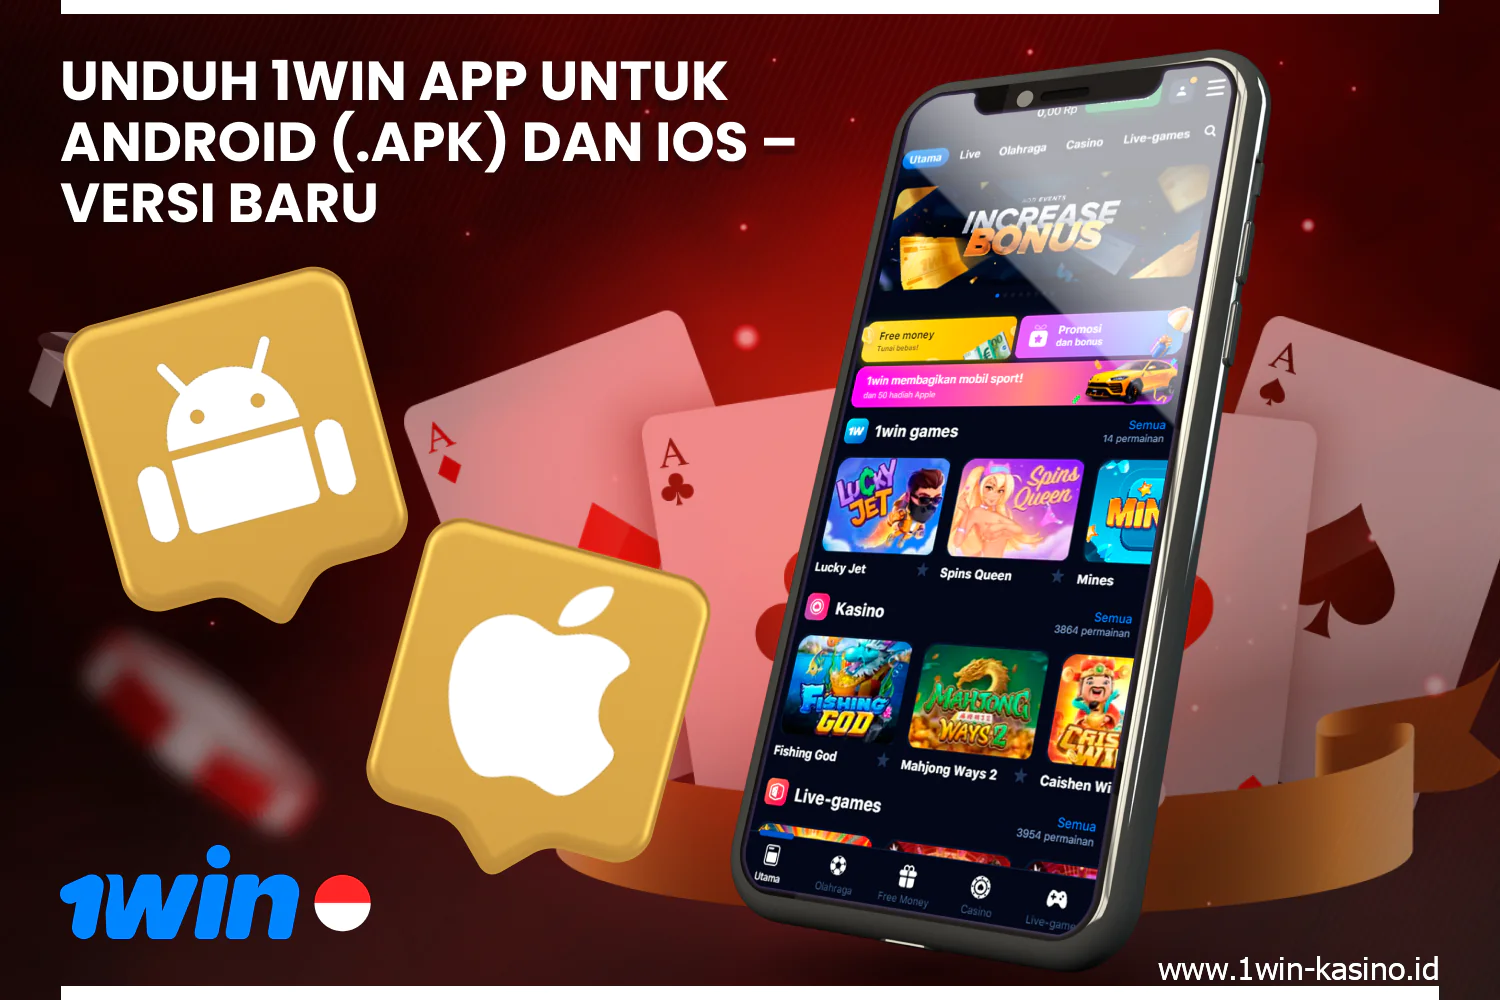 On the 1win mobile app, Indonesian users can place sports bets, manage accounts and play casino games